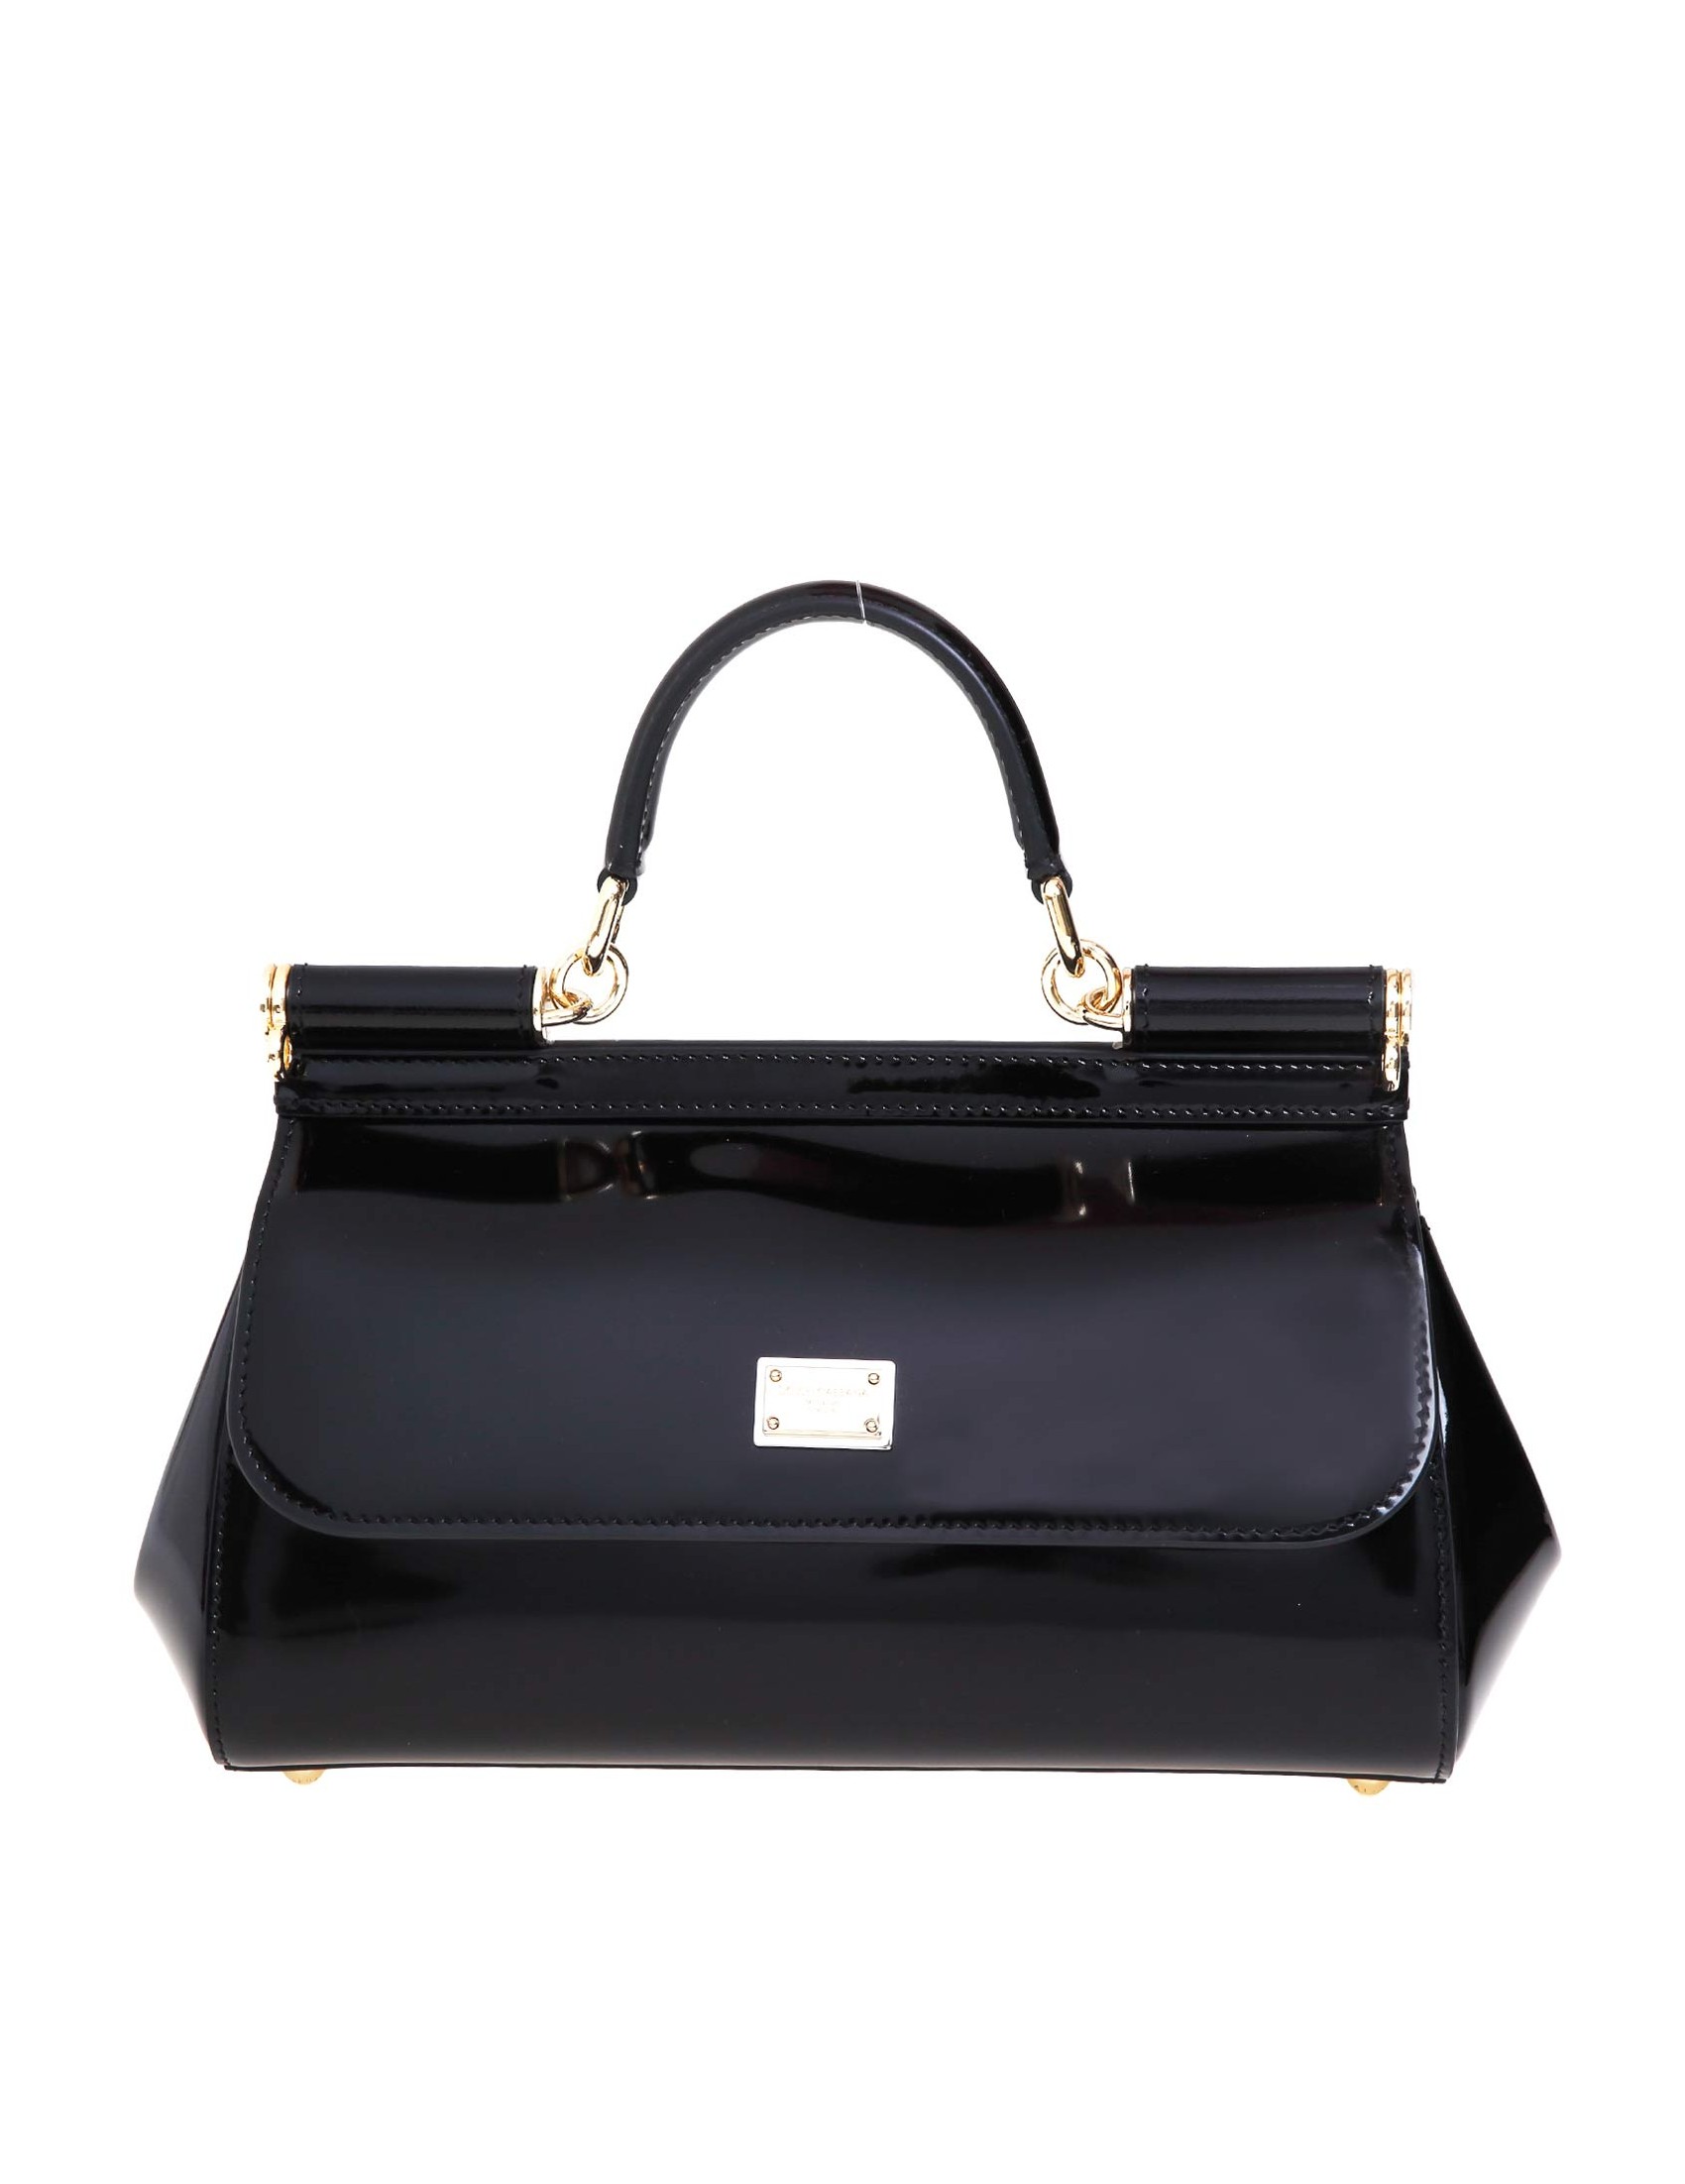 DOLCE & GABBANA SMALL SICILY BAG IN POLISHED LEATHER